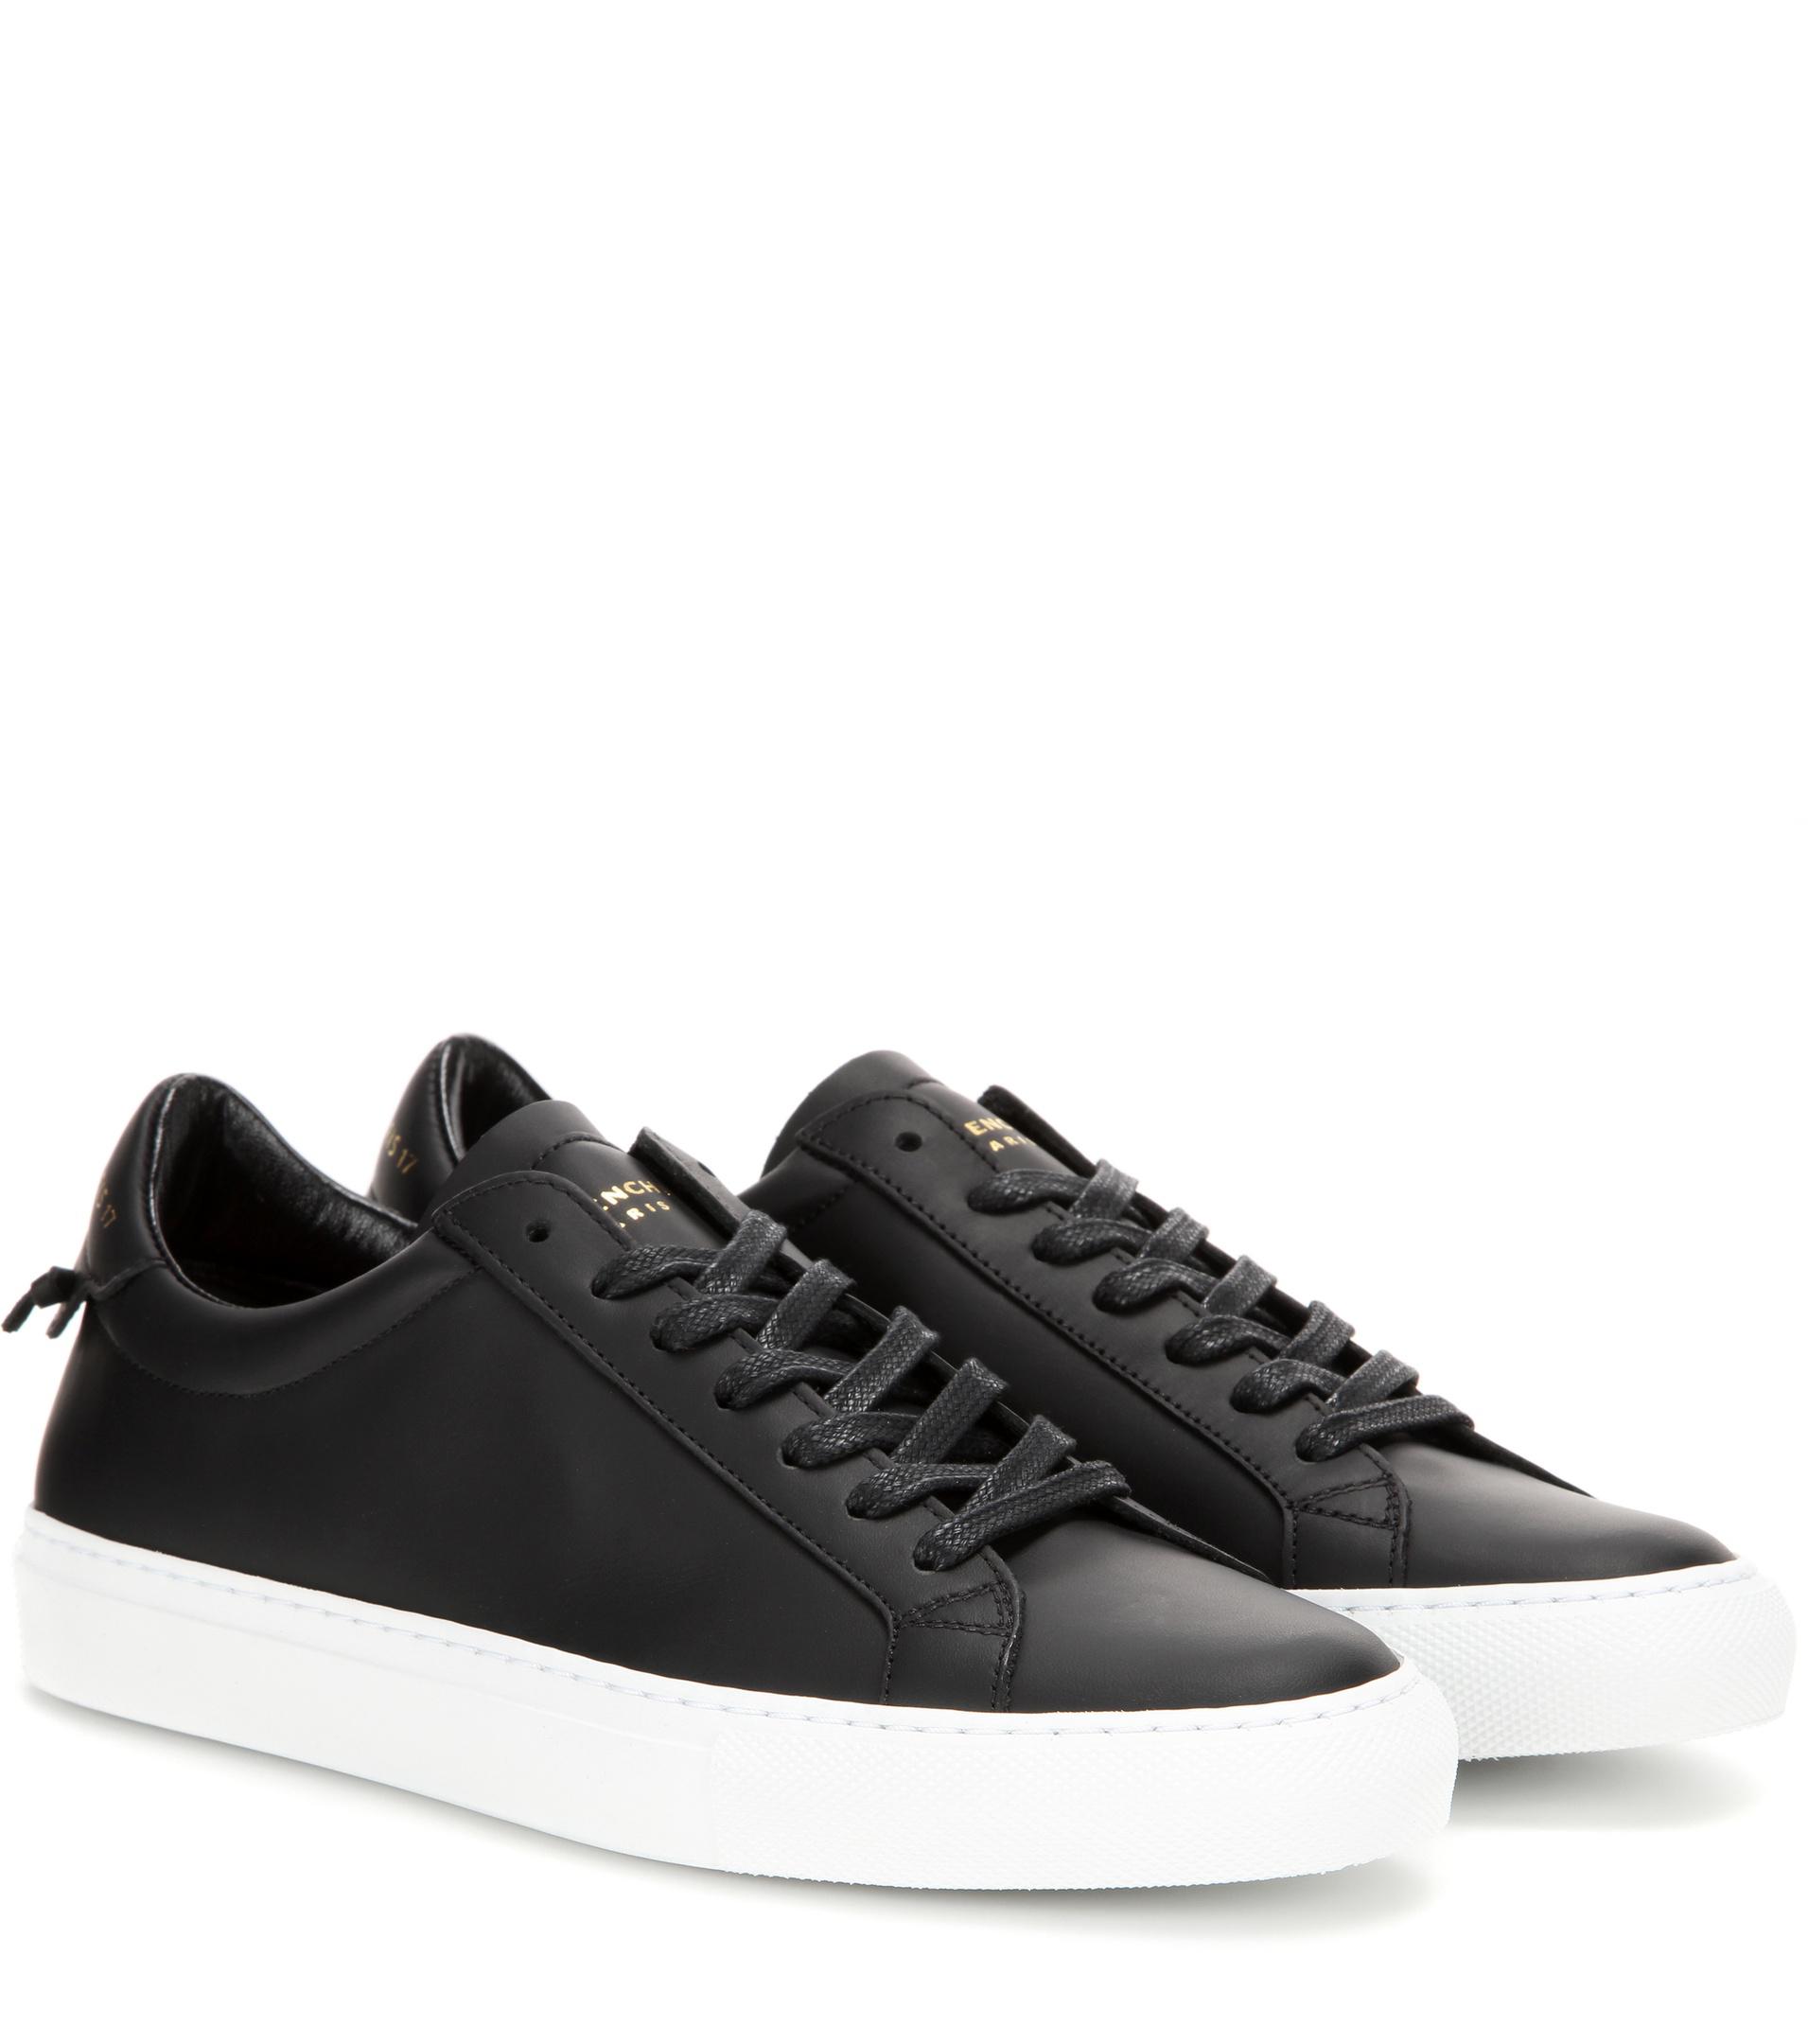 Lyst - Givenchy Urban Knots Leather Sneakers in Black